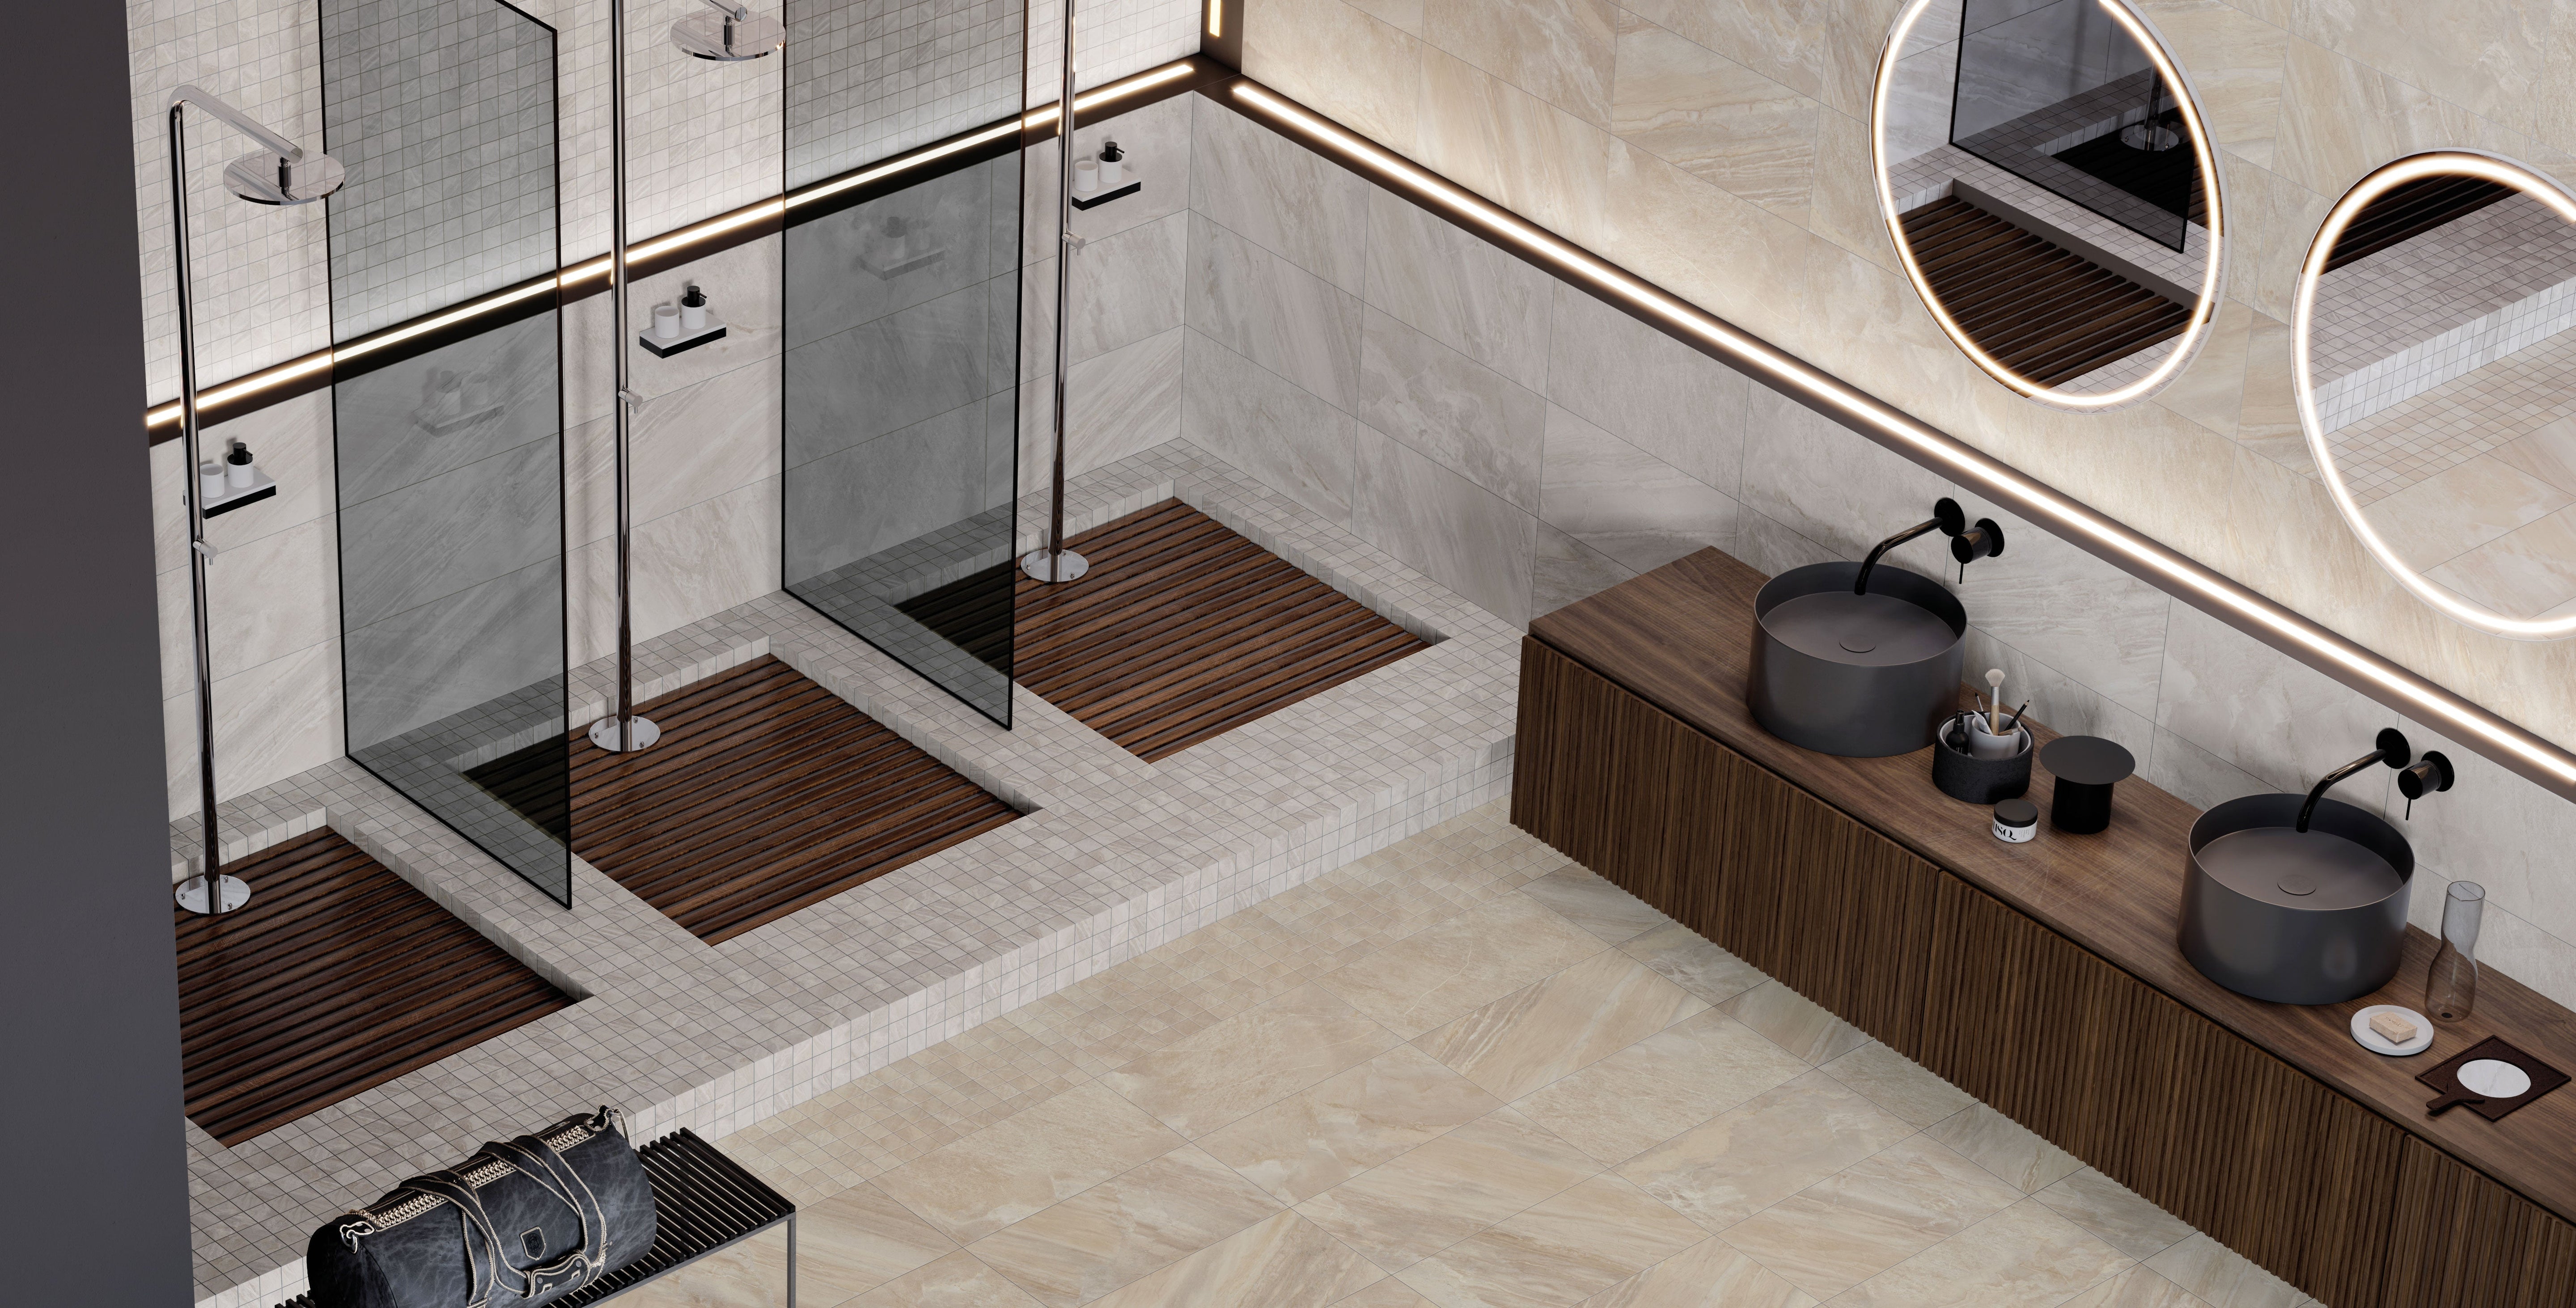 Luxurious Barcelona porcelain tile collection by Surface Group featuring elegant beige marble pattern in a modern bathroom setting with sleek fixtures and wooden accents.